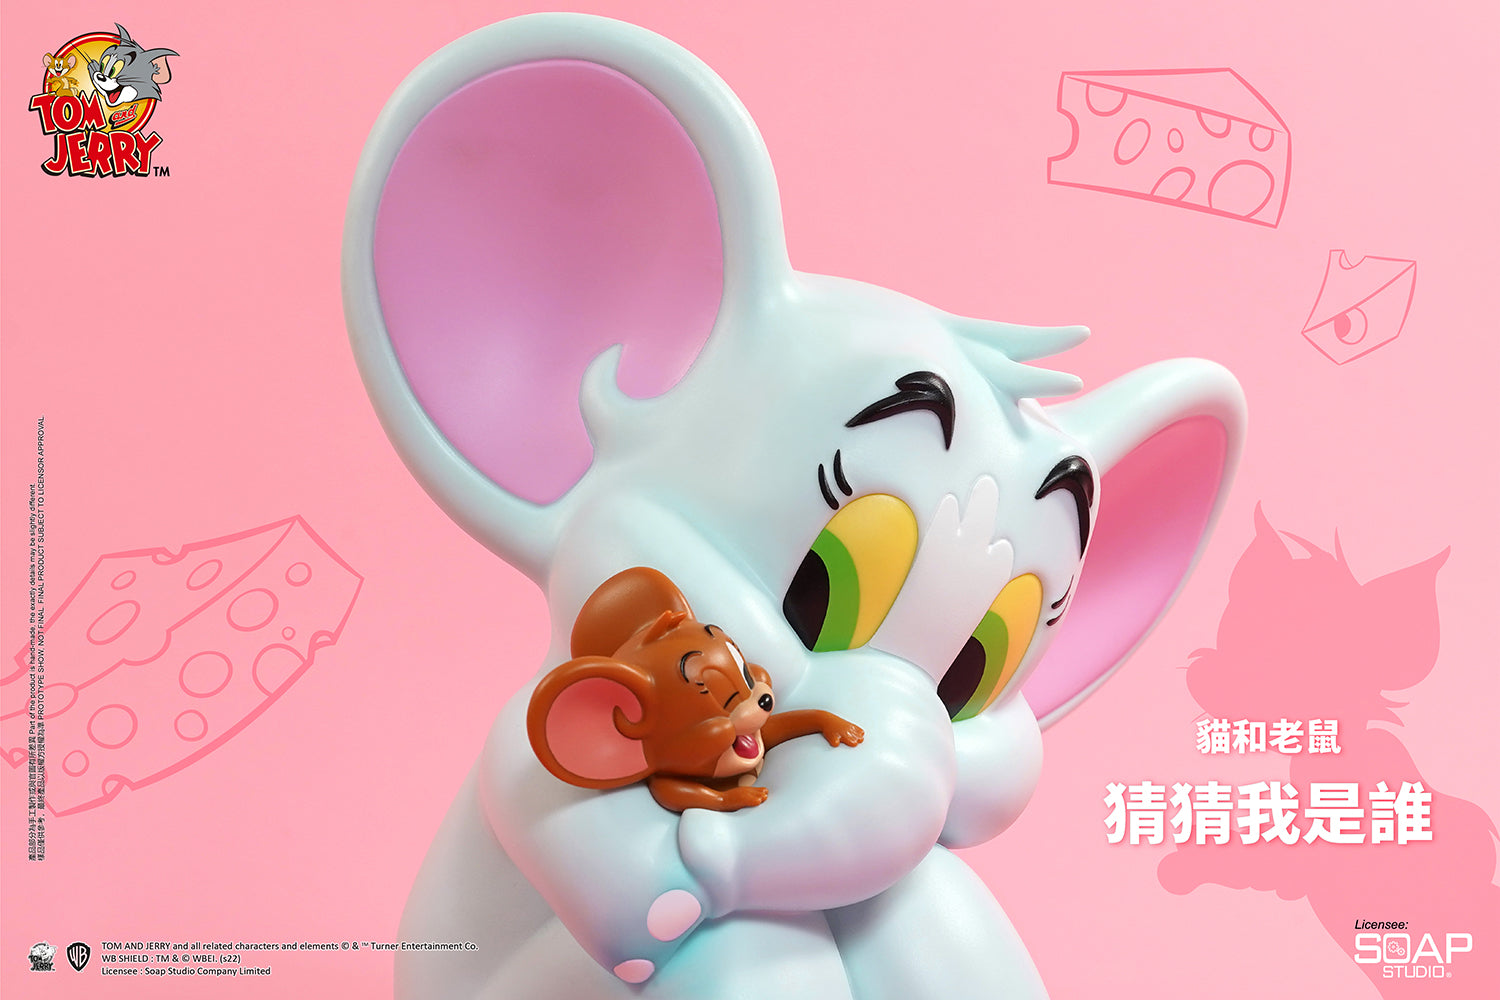 Soap Studio CA271 Tom and Jerry - Guess Who Figure